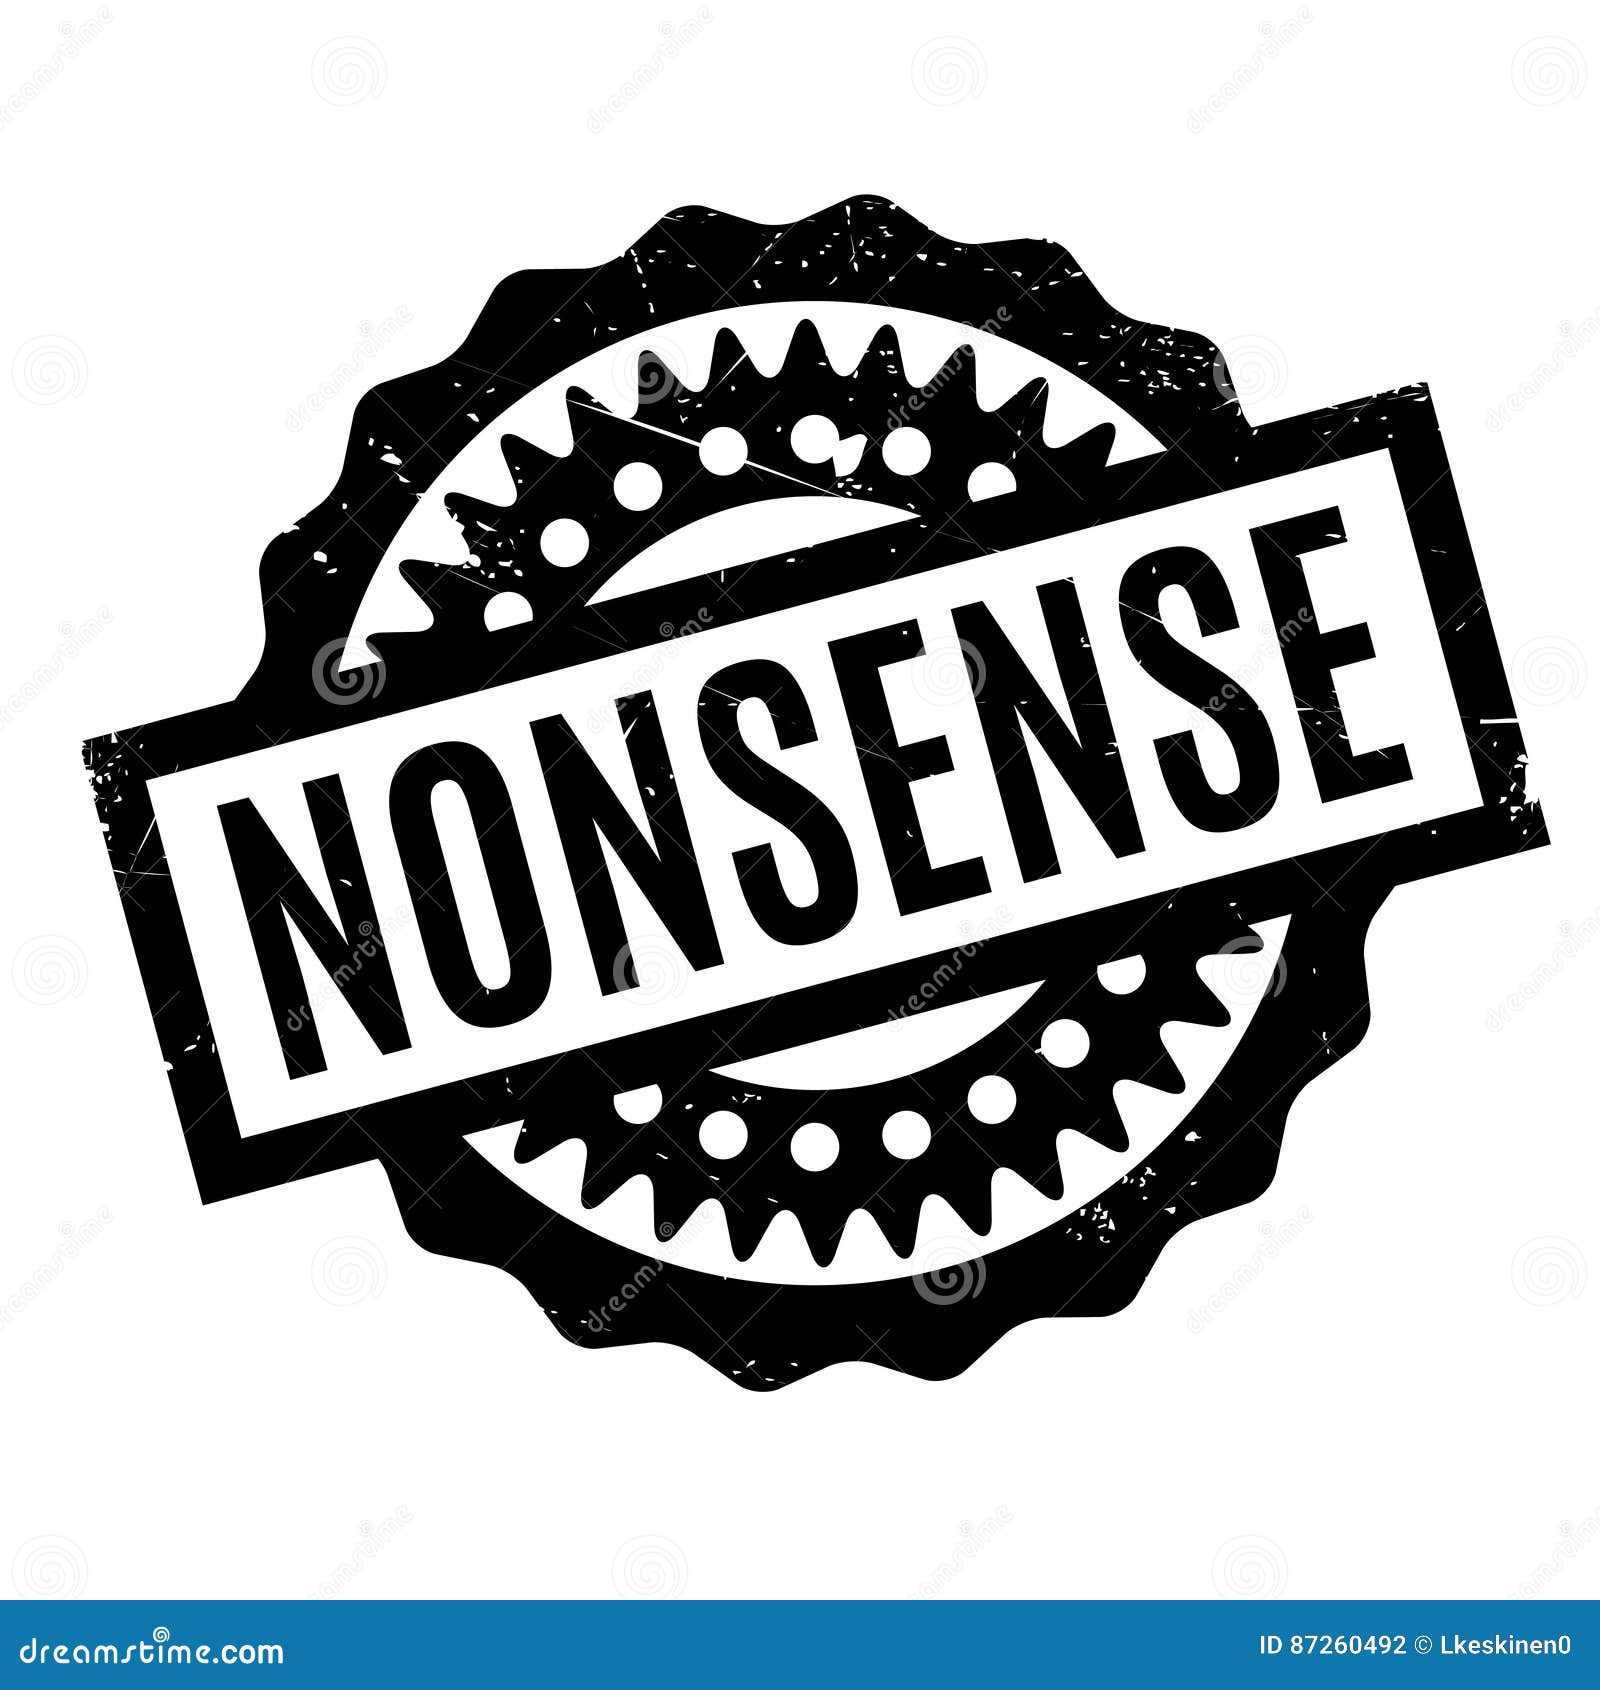 Nonsense rubber stamp Royalty Free Vector Image